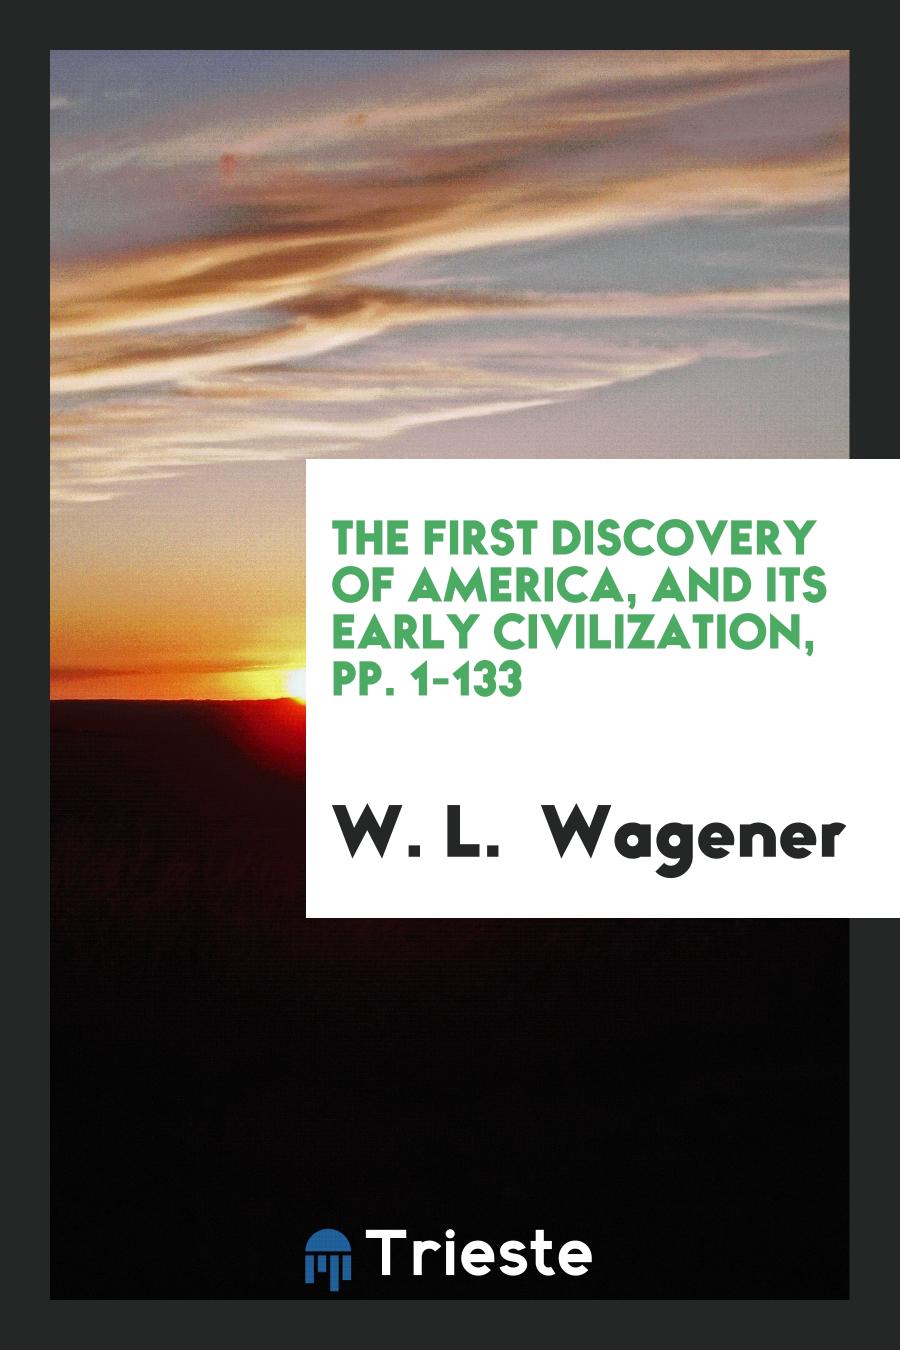 The First Discovery of America, and Its Early Civilization, pp. 1-133